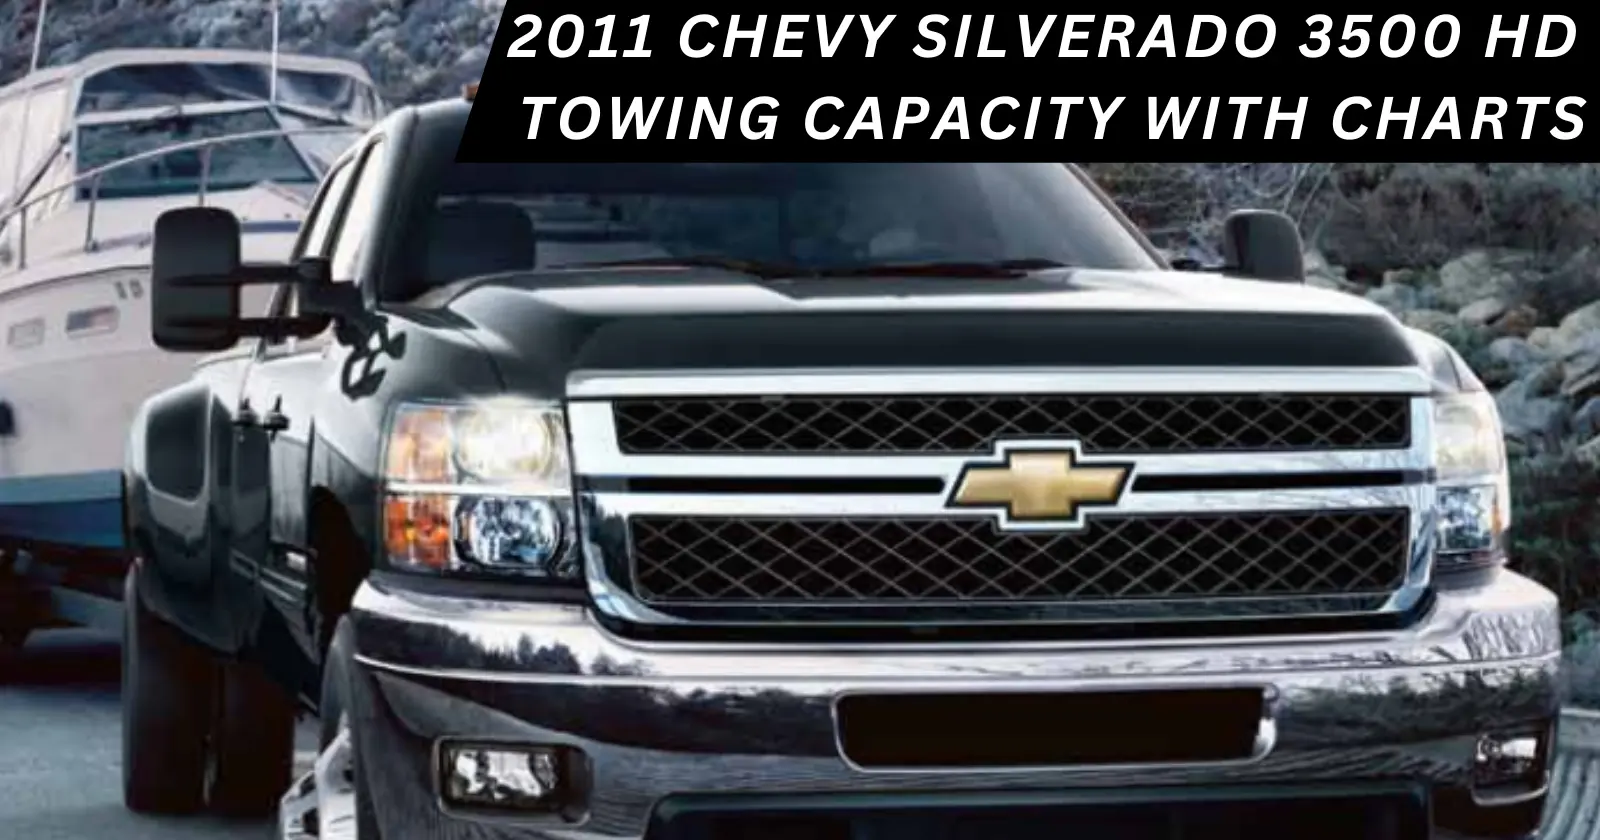 2011 Chevy Silverado 3500 HD Towing Capacity: Tow up to 21,700 lbs